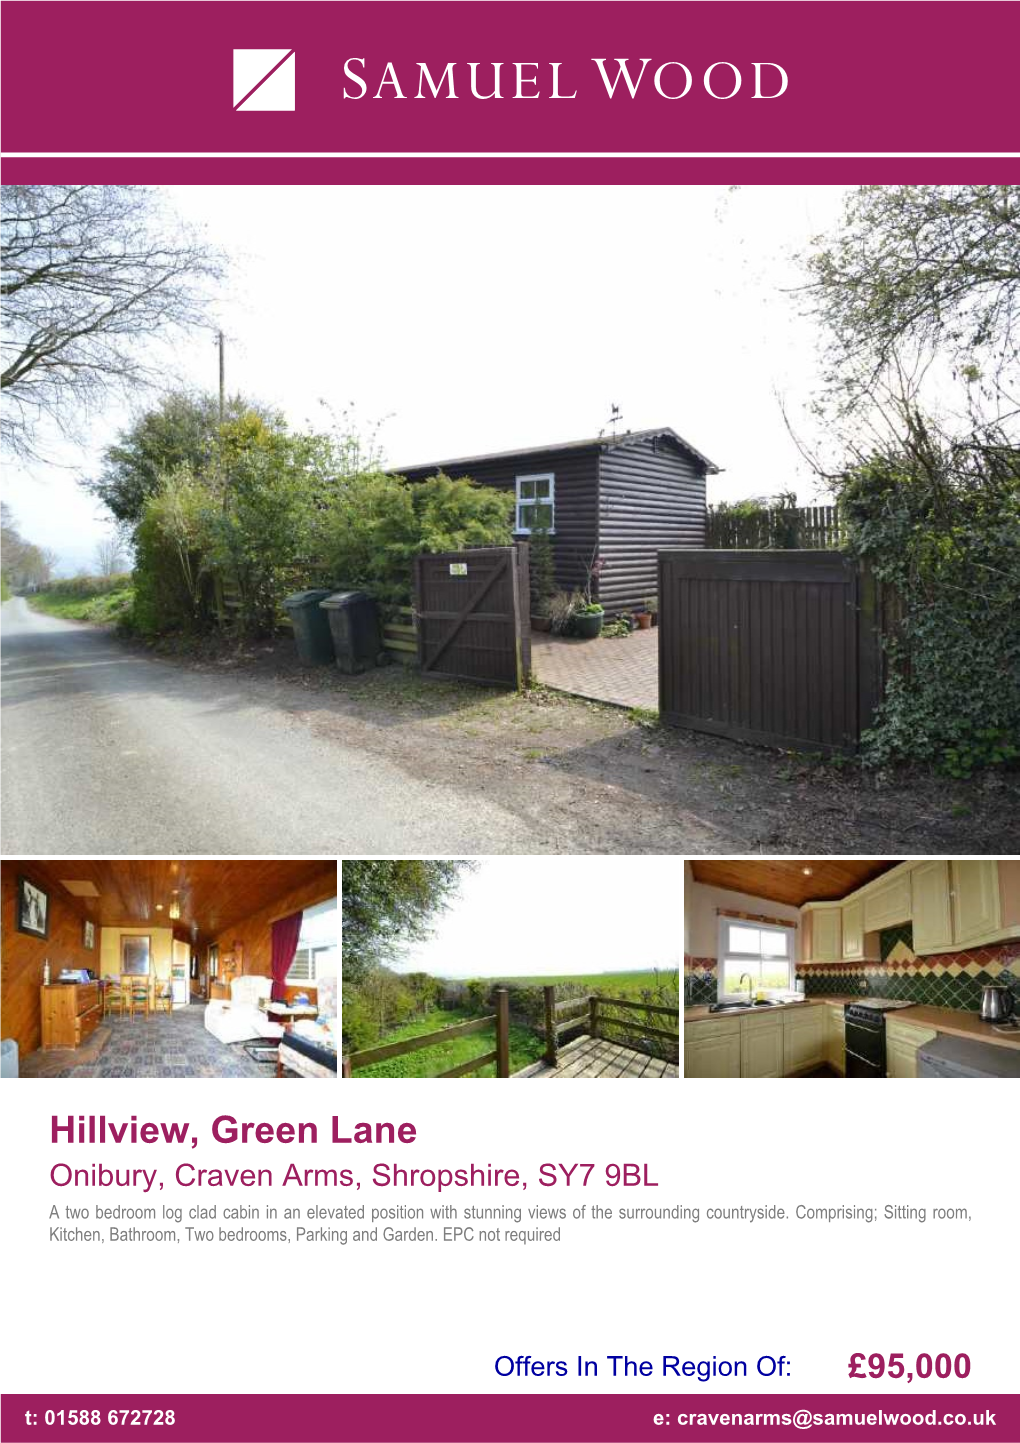 Hillview, Green Lane Onibury, Craven Arms, Shropshire, SY7 9BL a Two Bedroom Log Clad Cabin in an Elevated Position with Stunning Views of the Surrounding Countryside